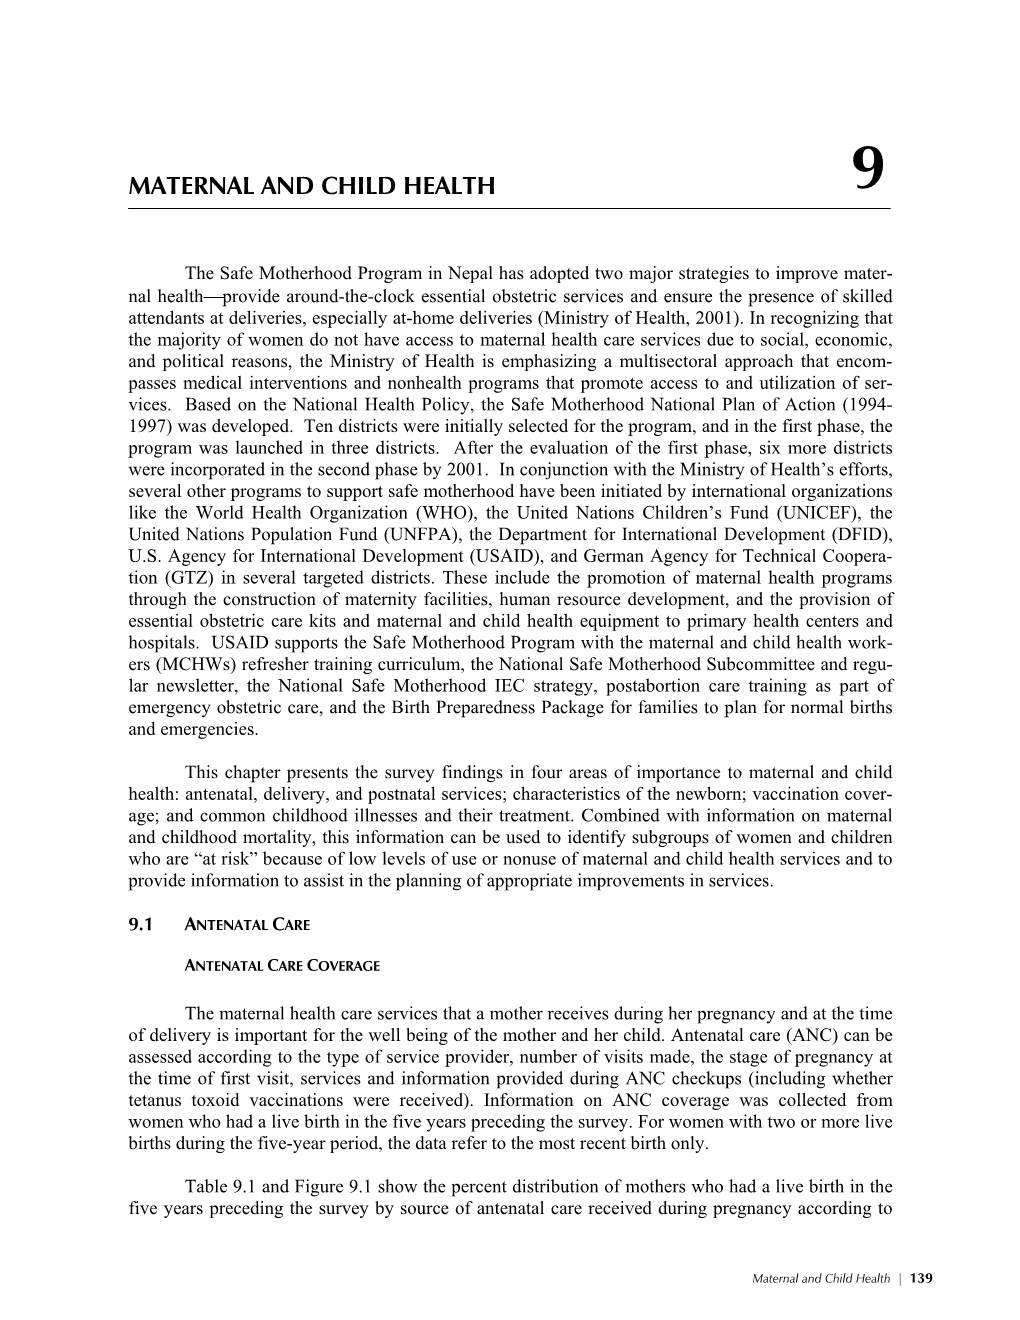 Maternal and Child Health 9